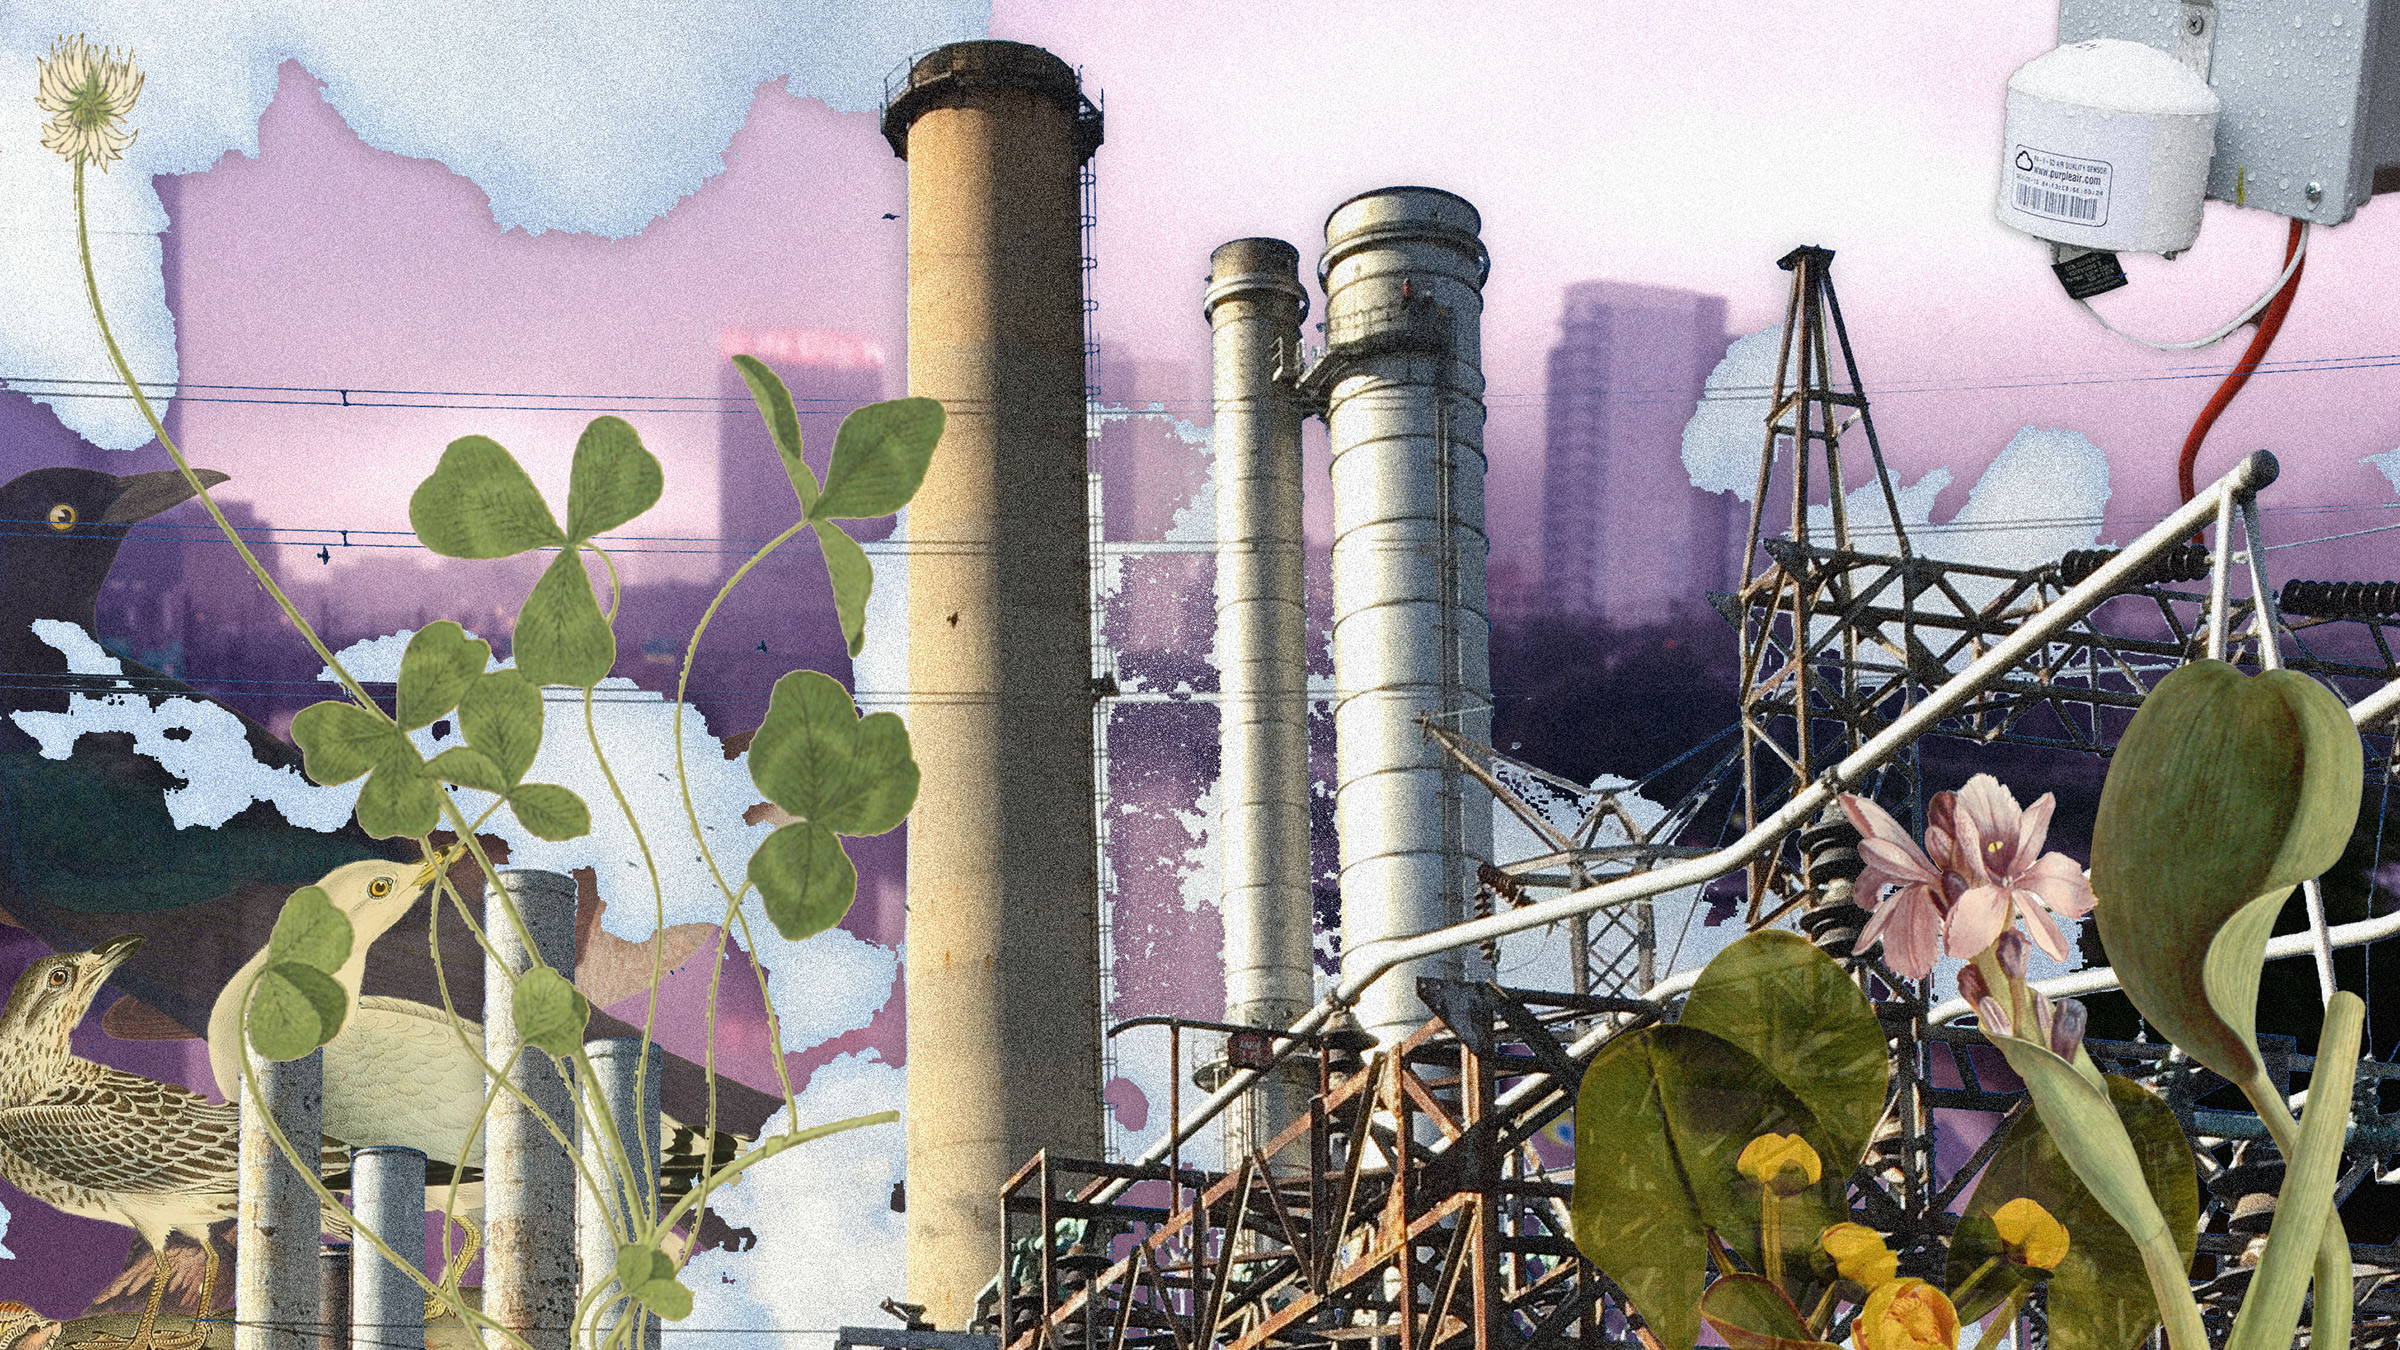 Birds and botanicals in front of a refinery